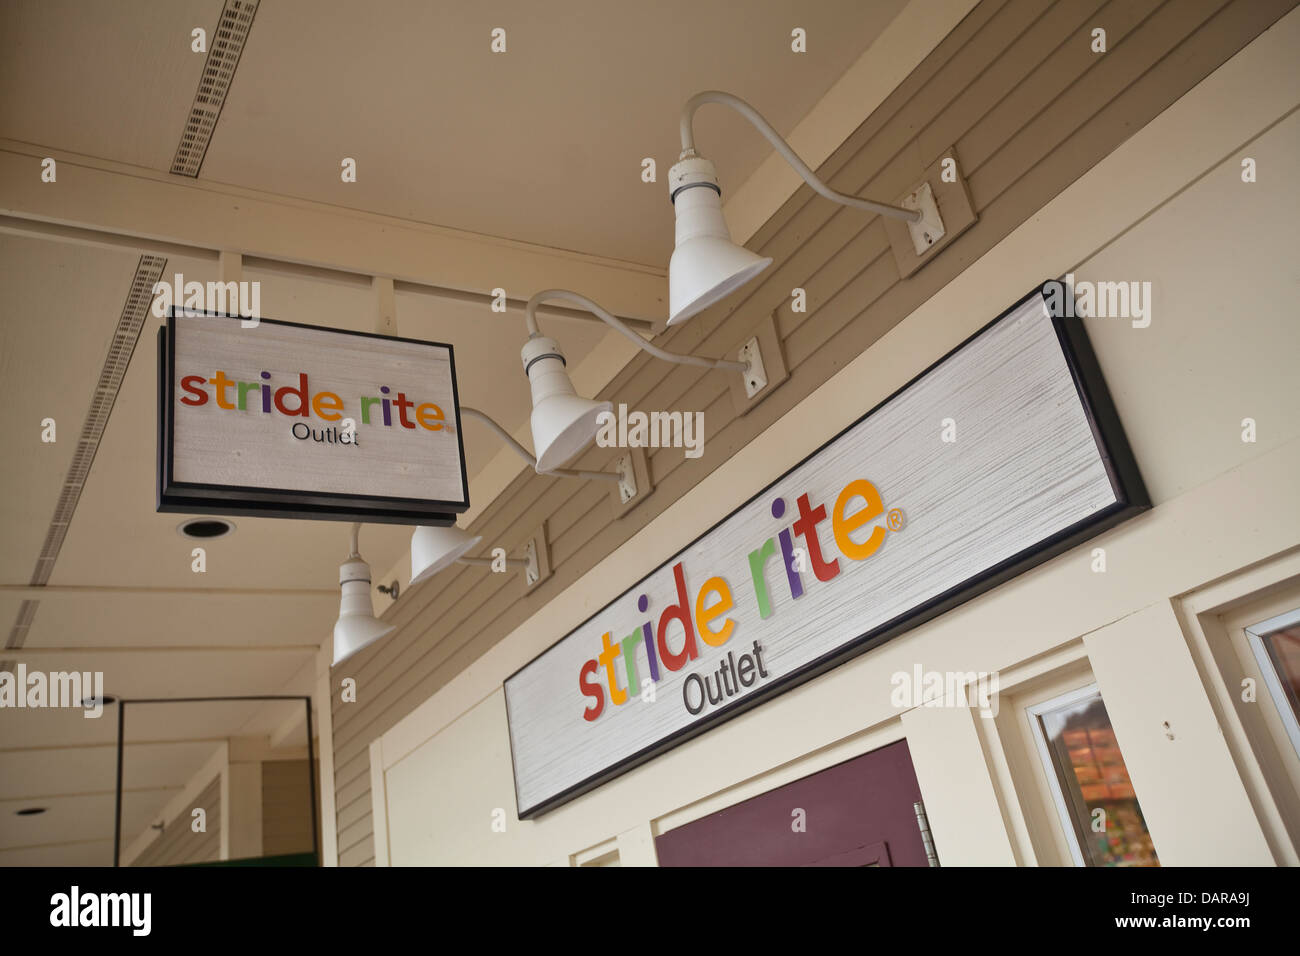 A Stride rite Outlet store is pictured 